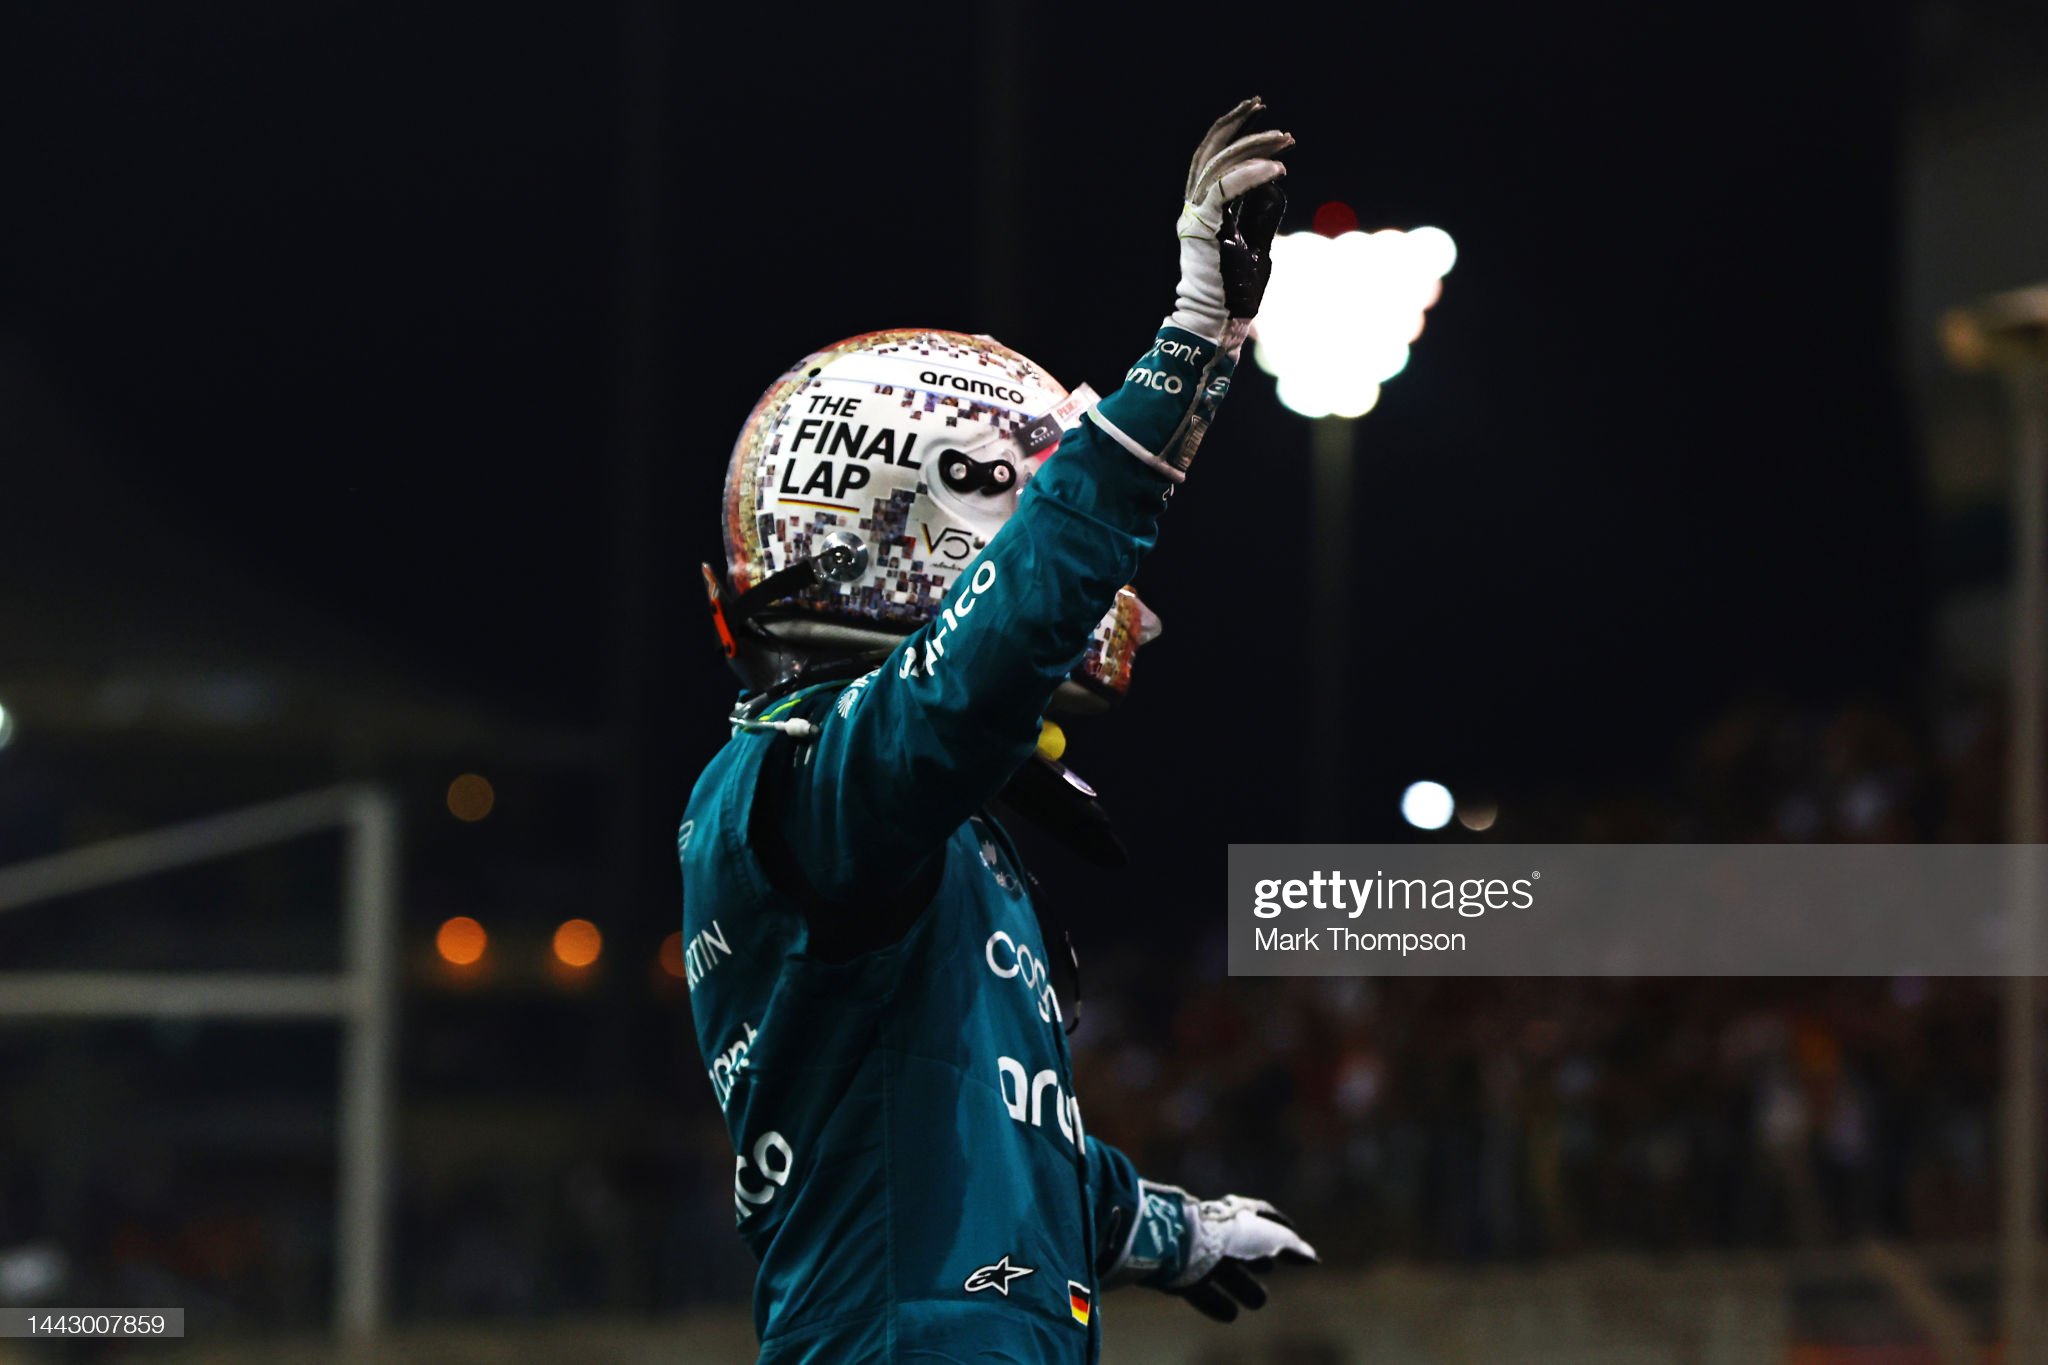 Tenth placed Sebastian Vettel of Germany and Aston Martin F1 Team waves to the crowd following his final race in F1.